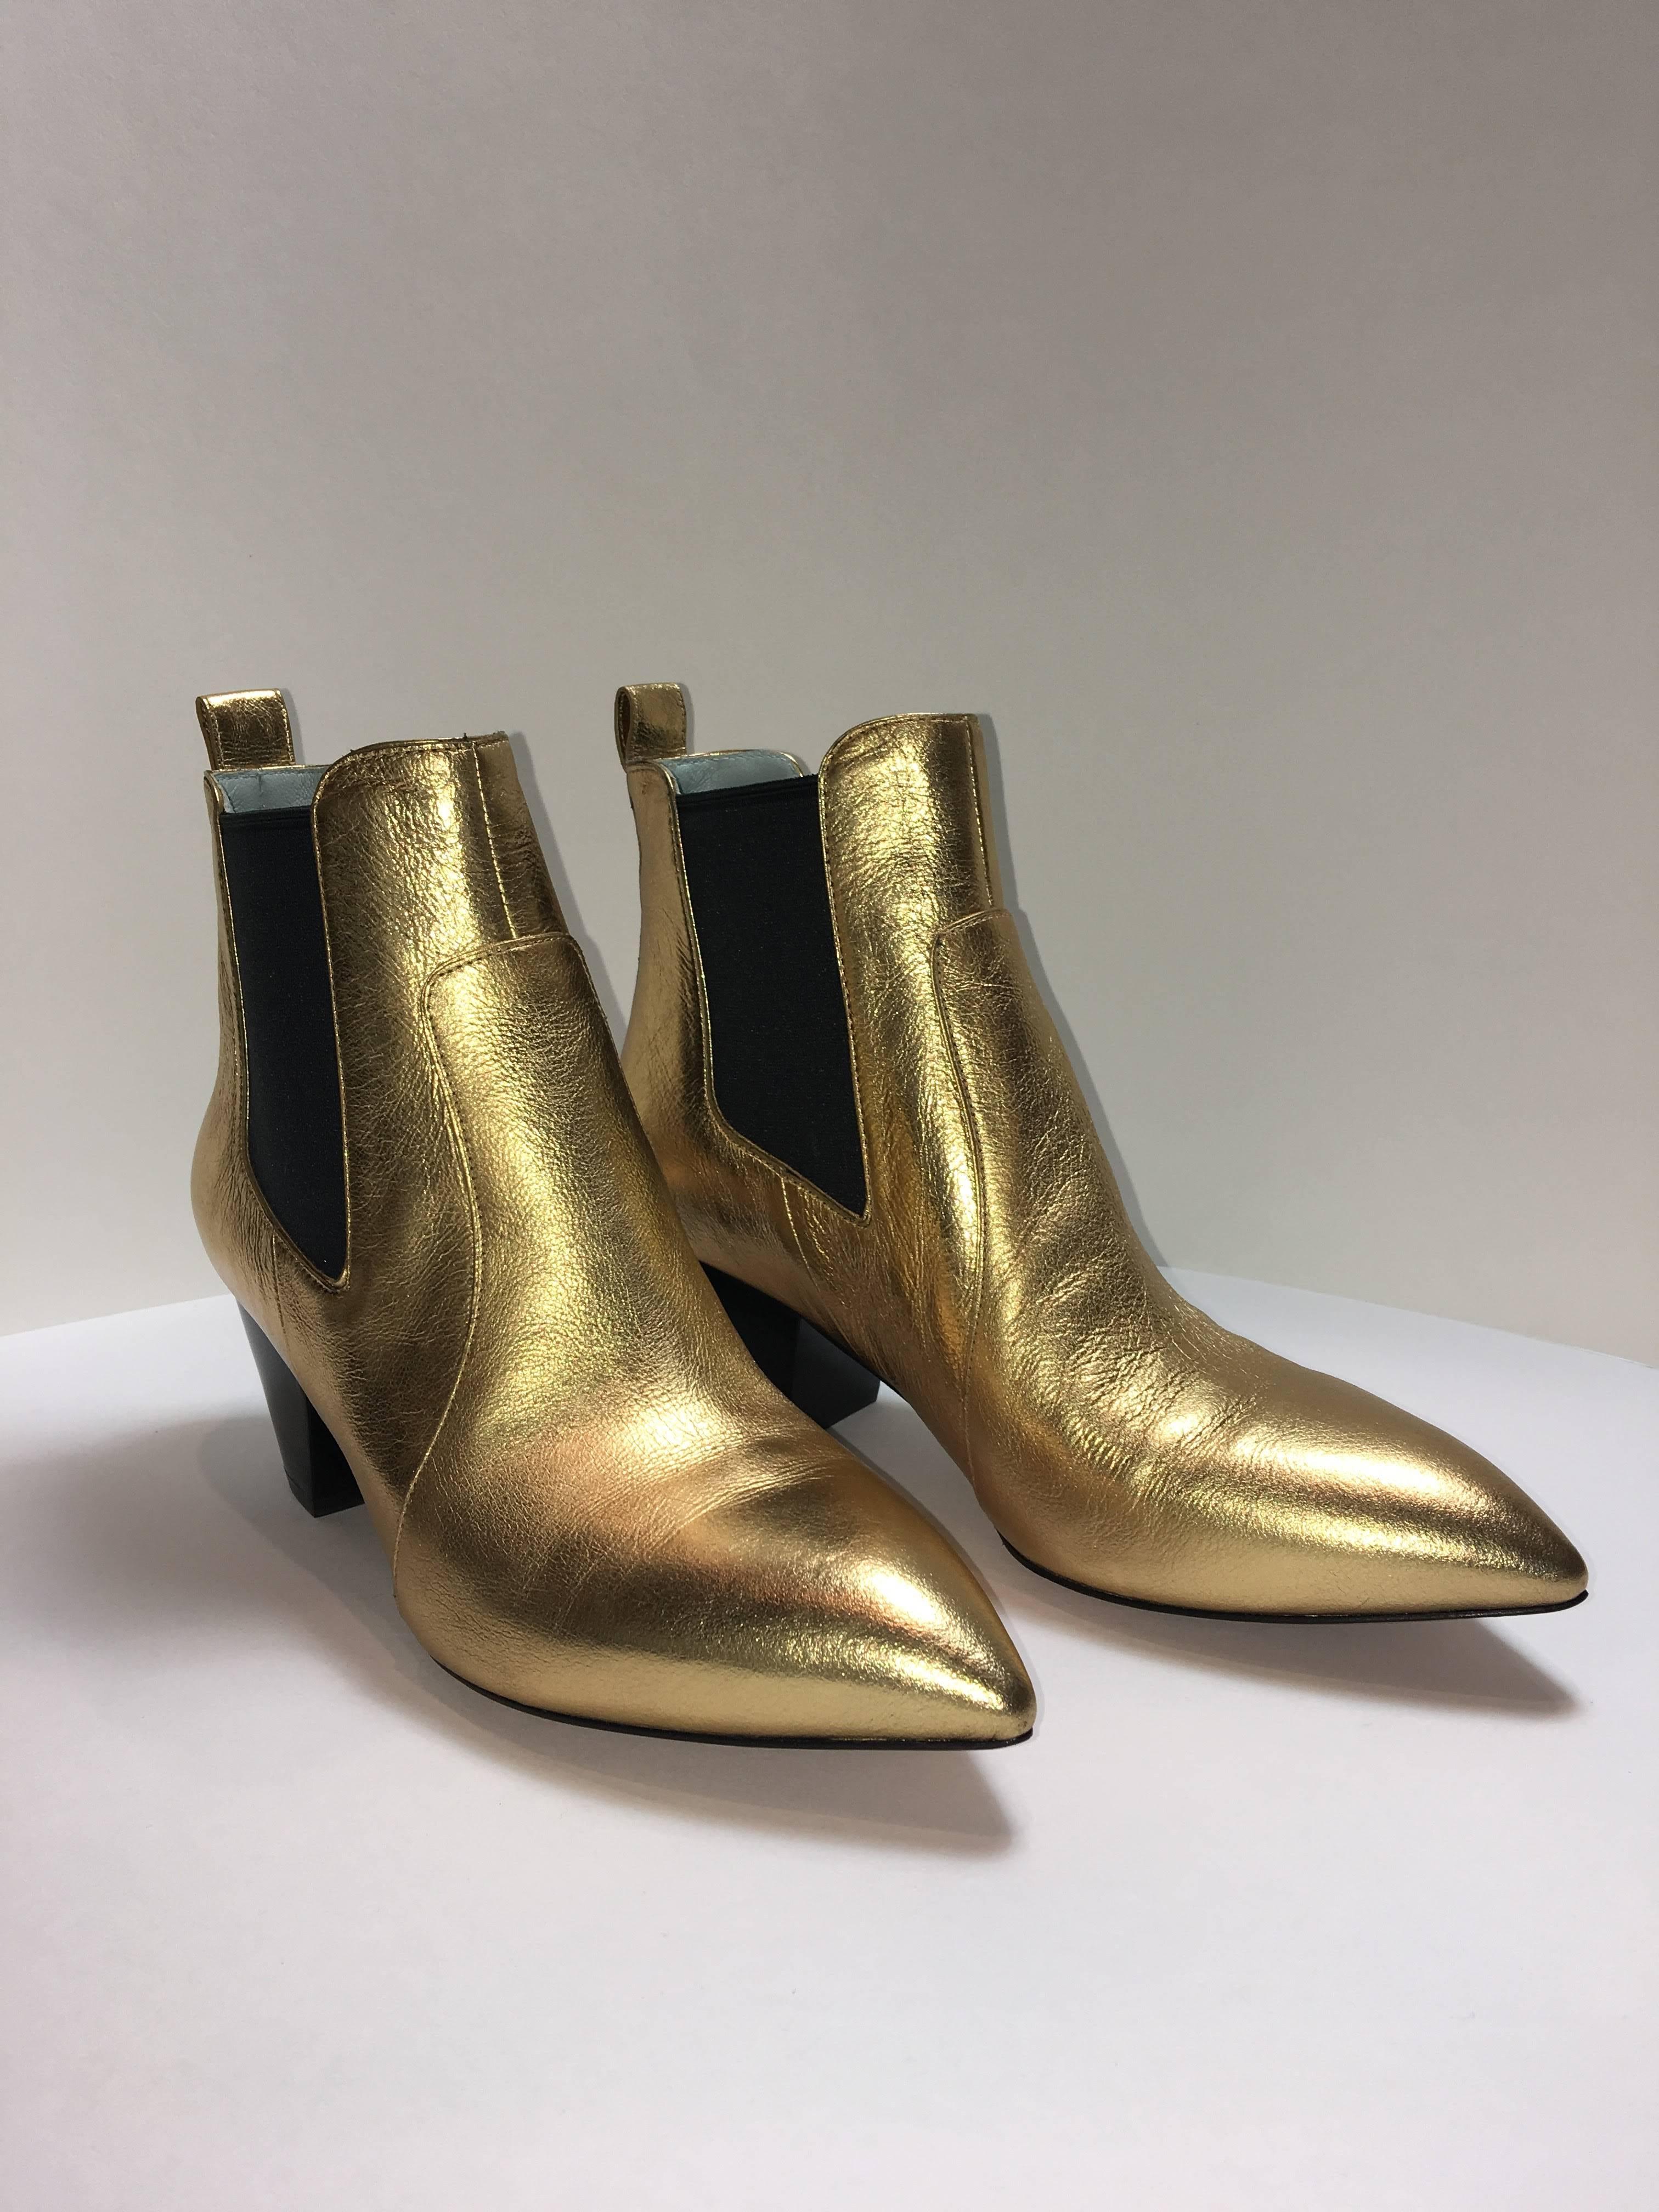 Golden Leather Bootie with contrasting black fabric at ankles. Easy to slip on with additional tab at ankle. Pointed toe and small heel.